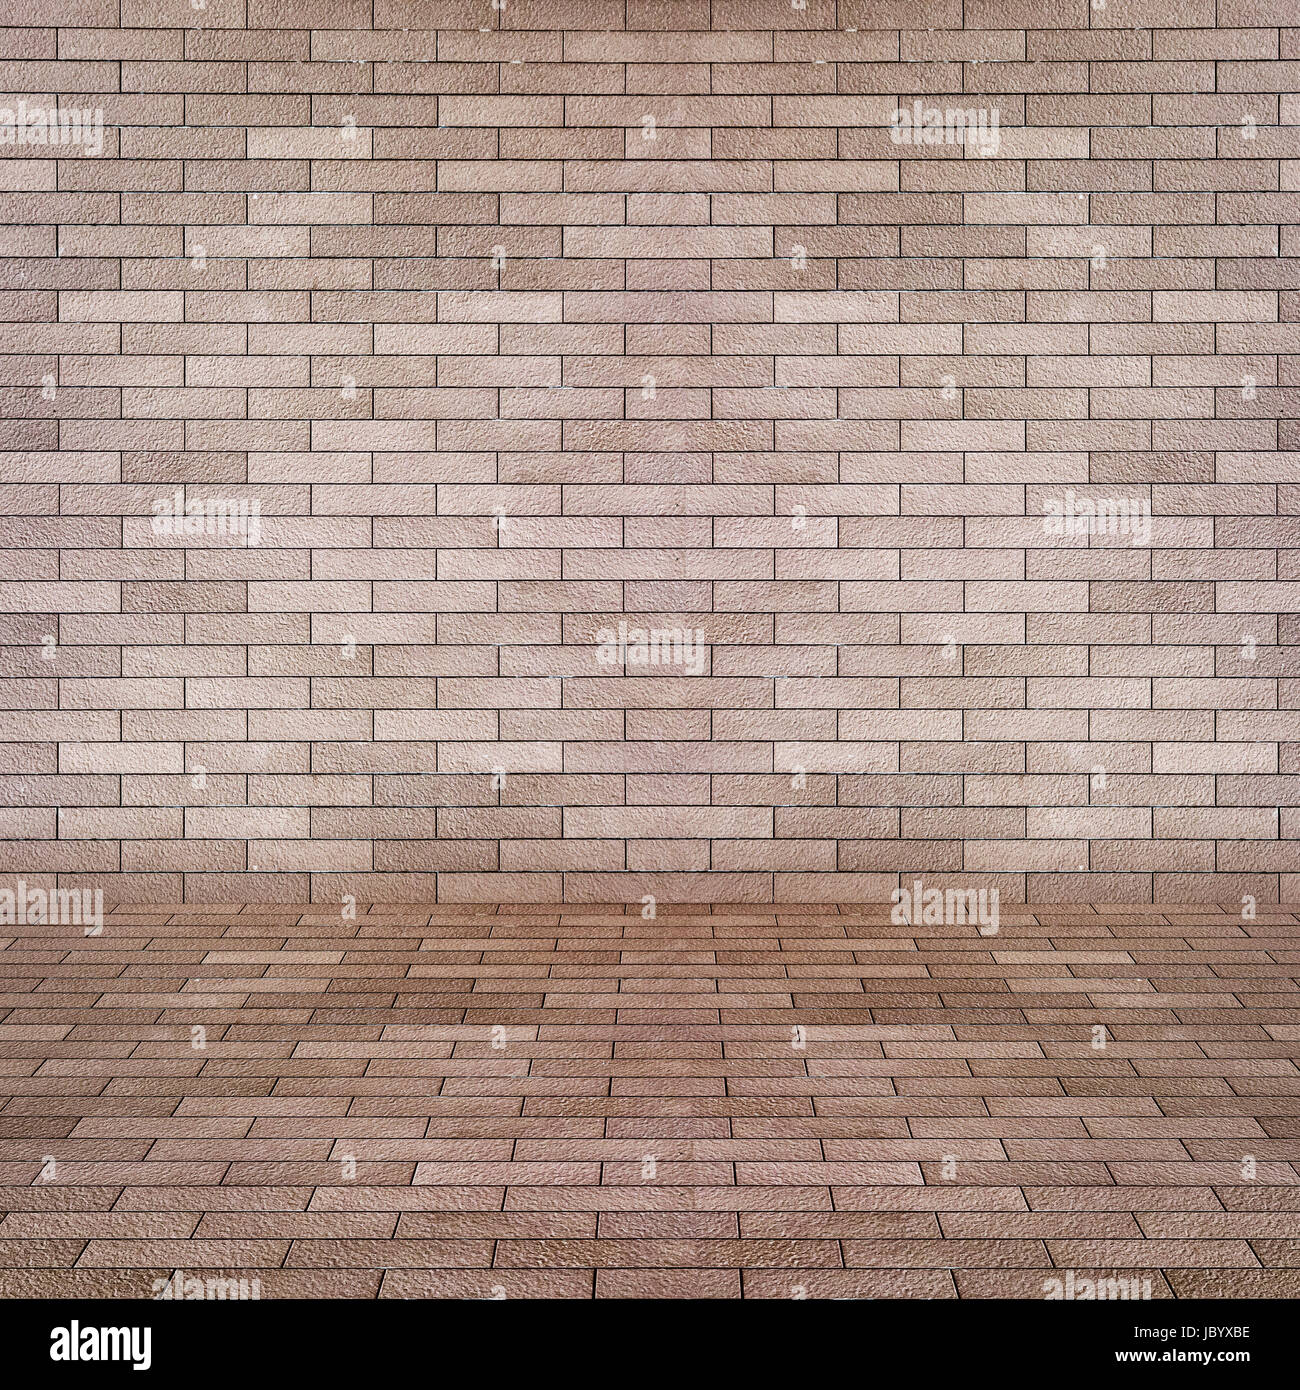 Empty interior perspective with brick tile background Stock Photo